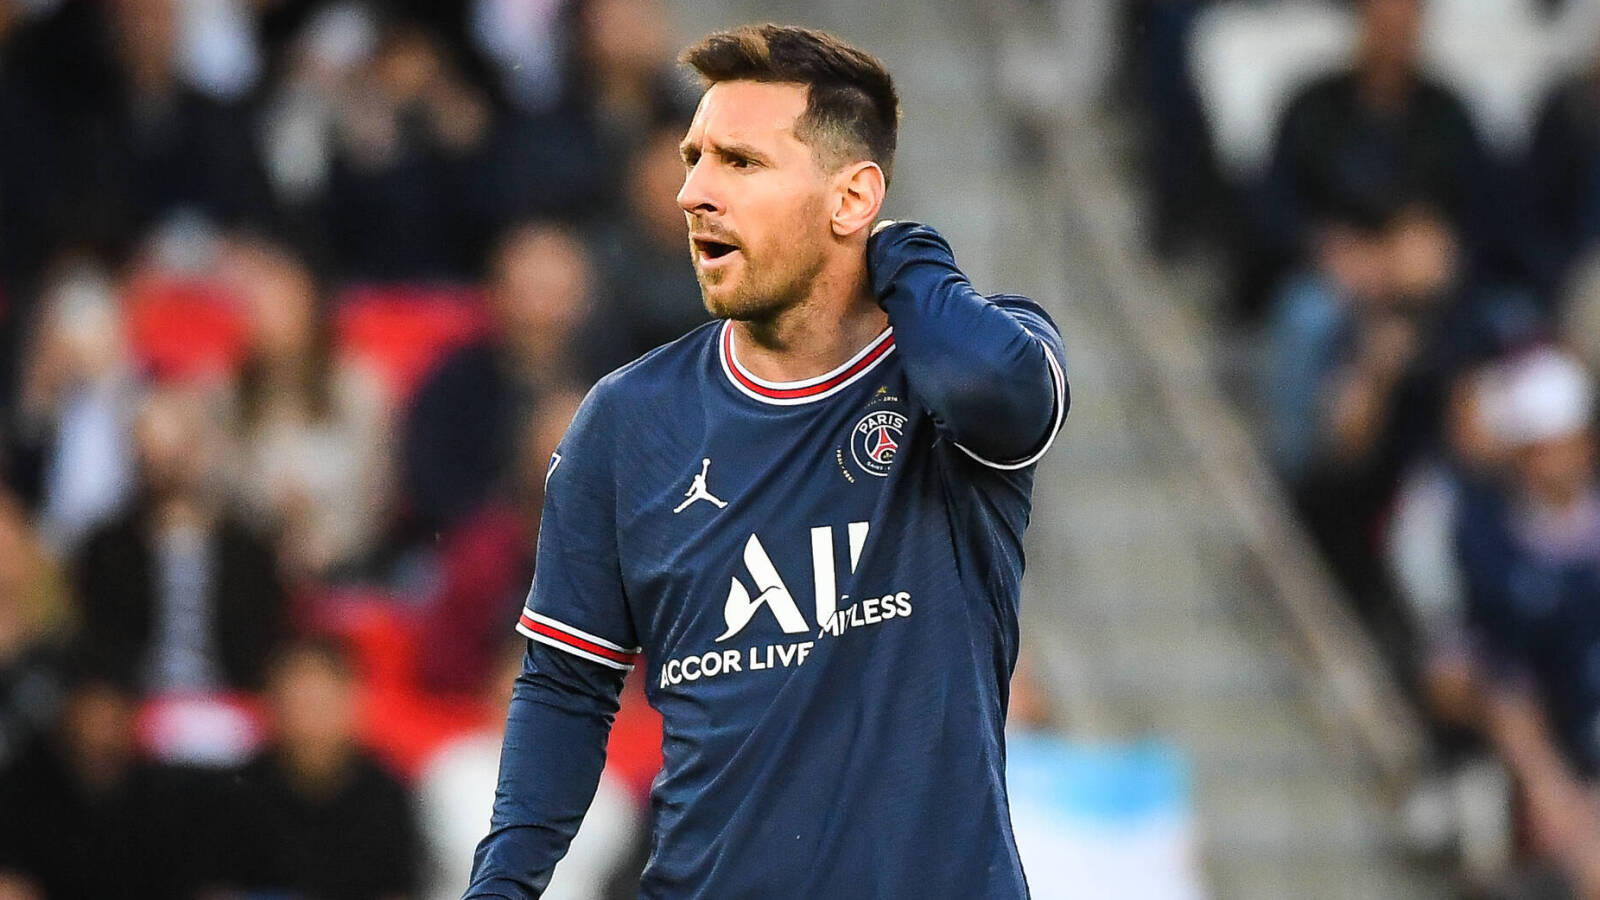 Lionel Messi to join MLS team Inter Miami in 2023